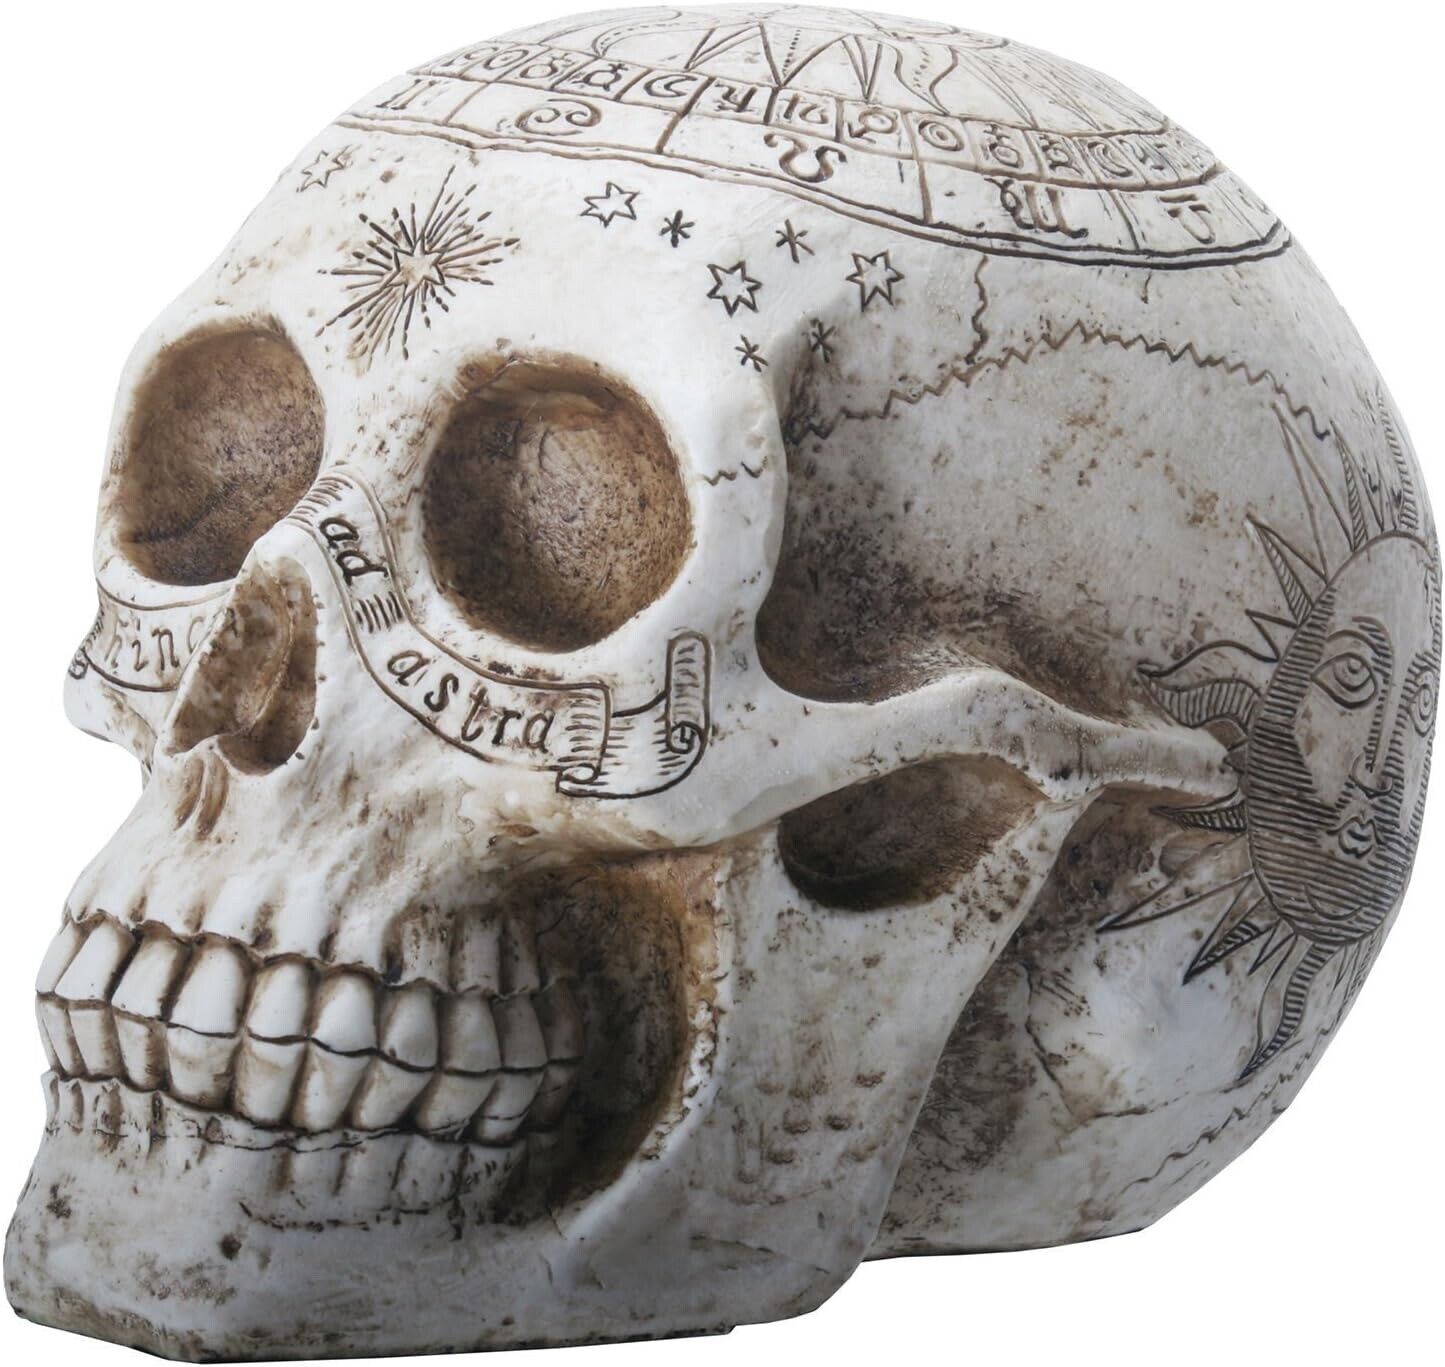 YTC 7.75 Inch Resin Skull with Astrology Engravings, White Colored